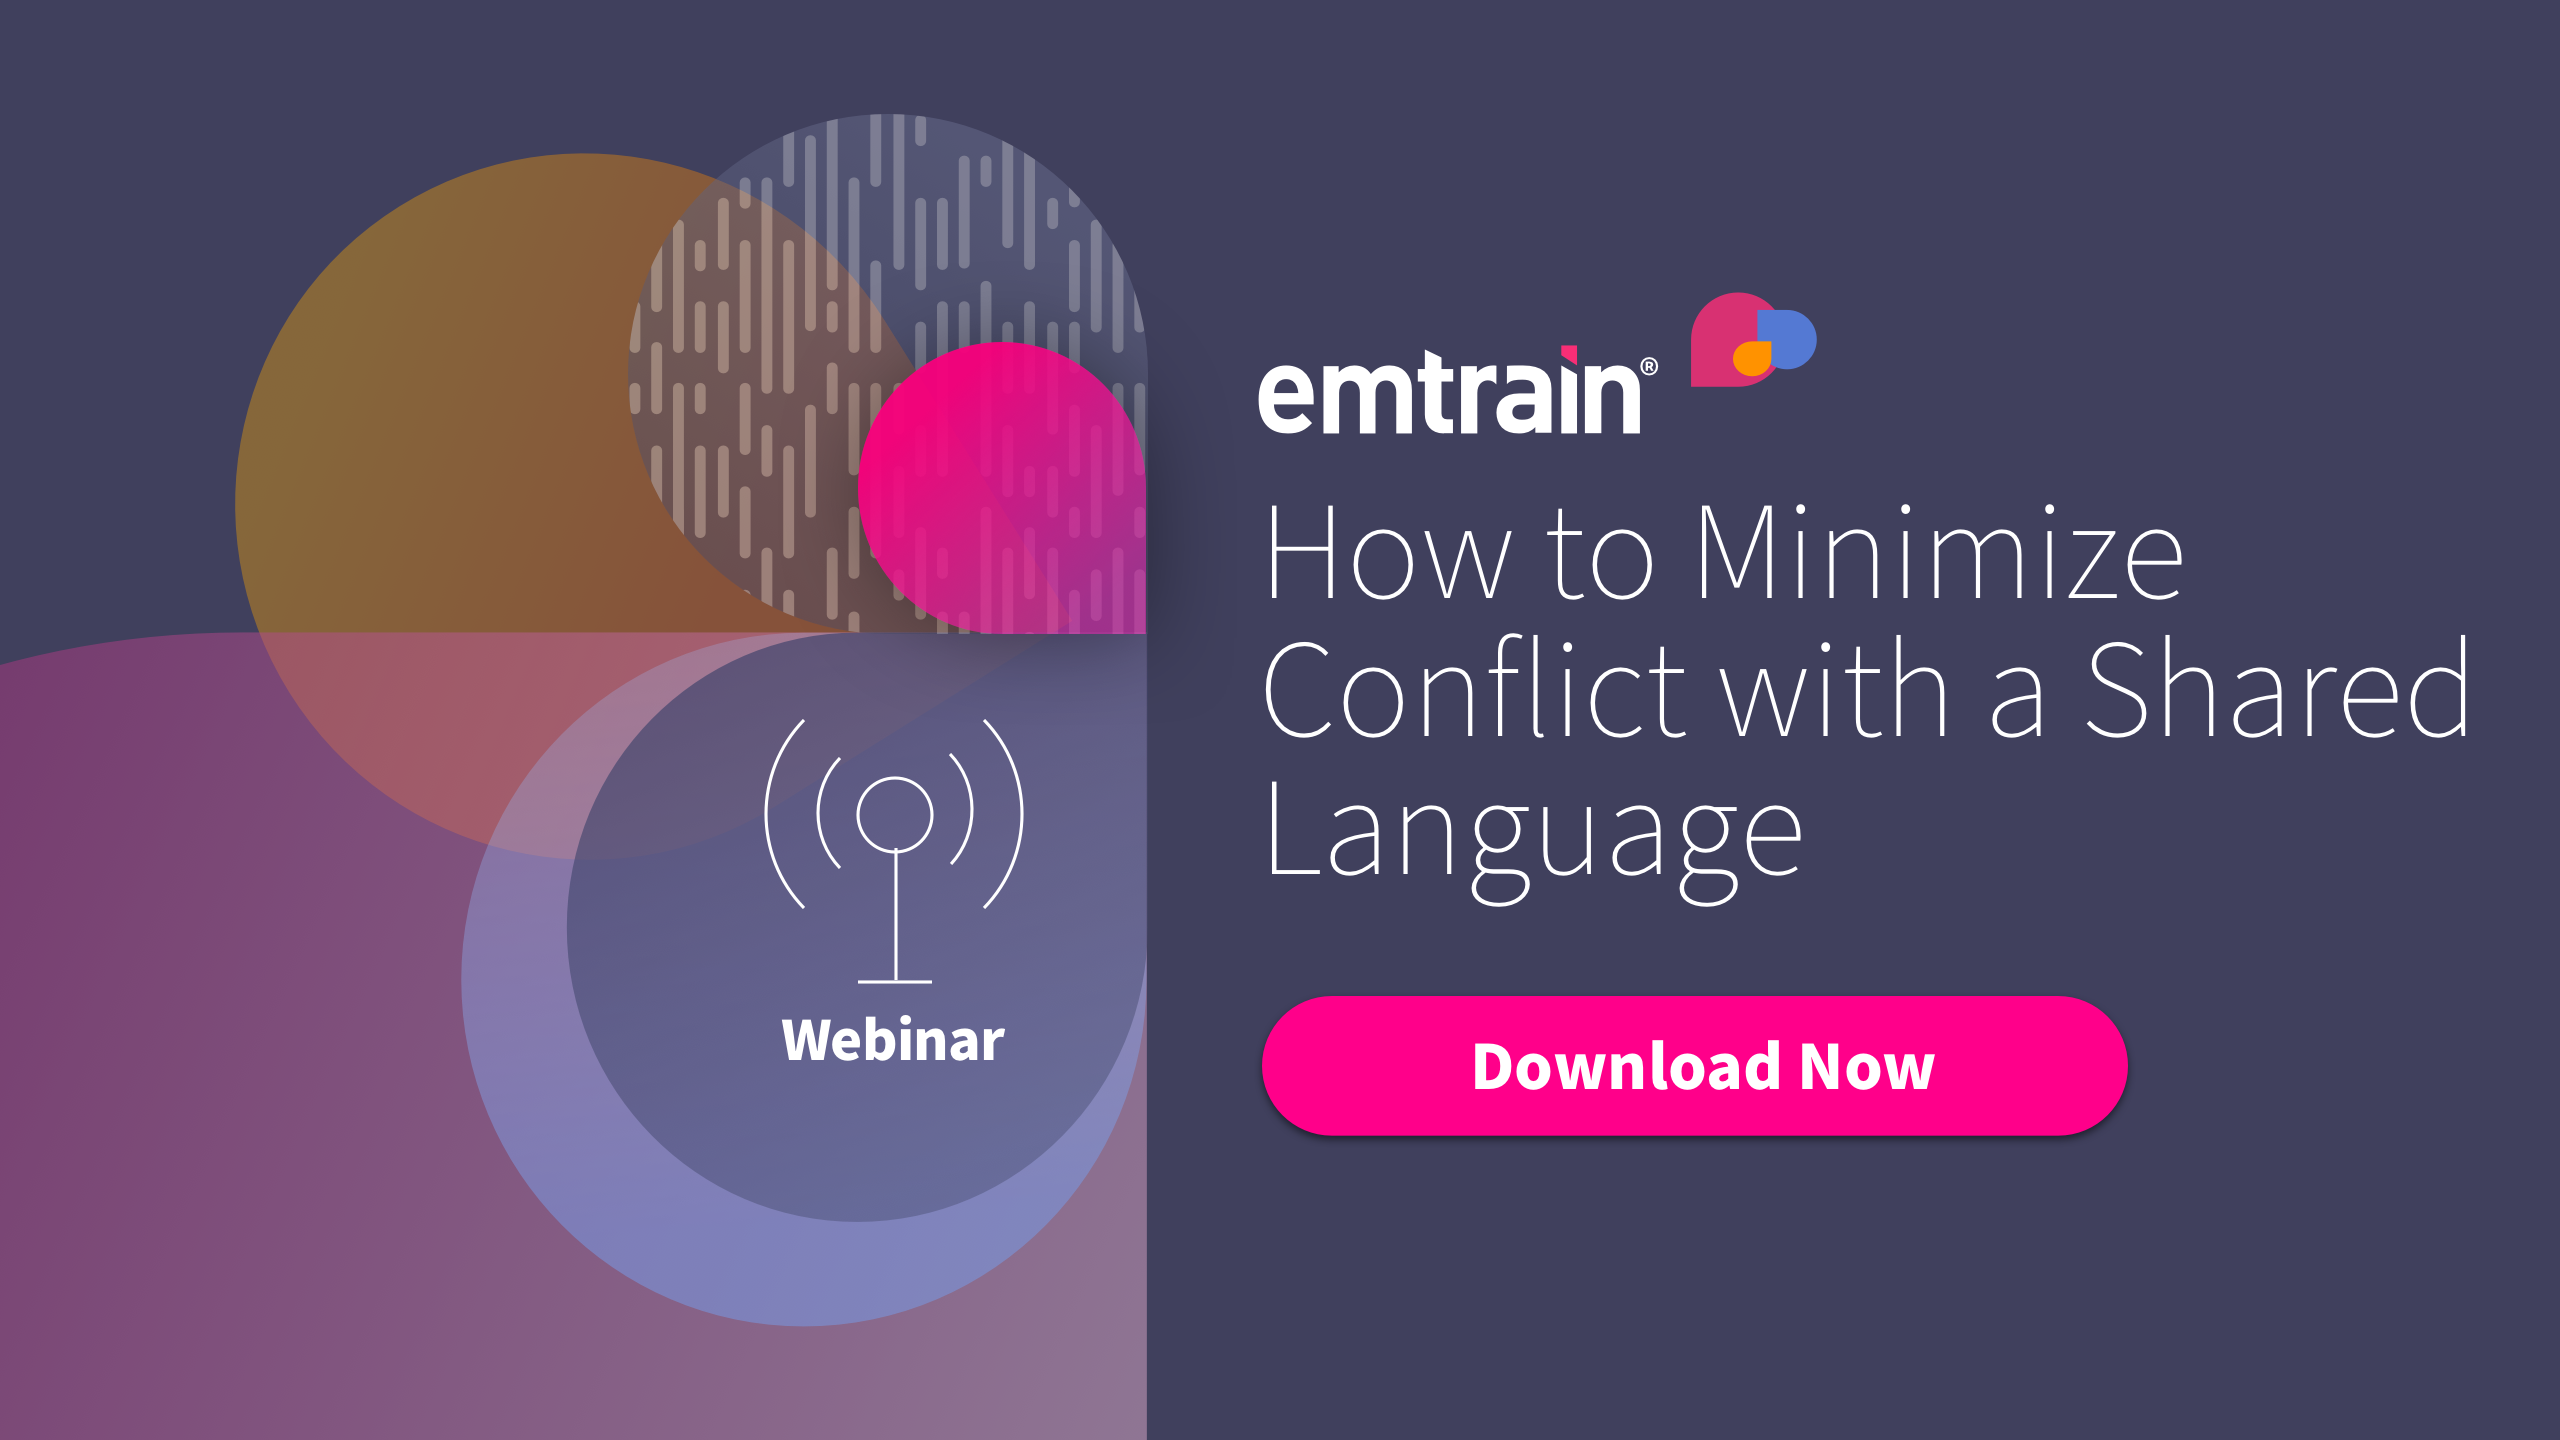 How to Minimize Conflict with a Shared Language